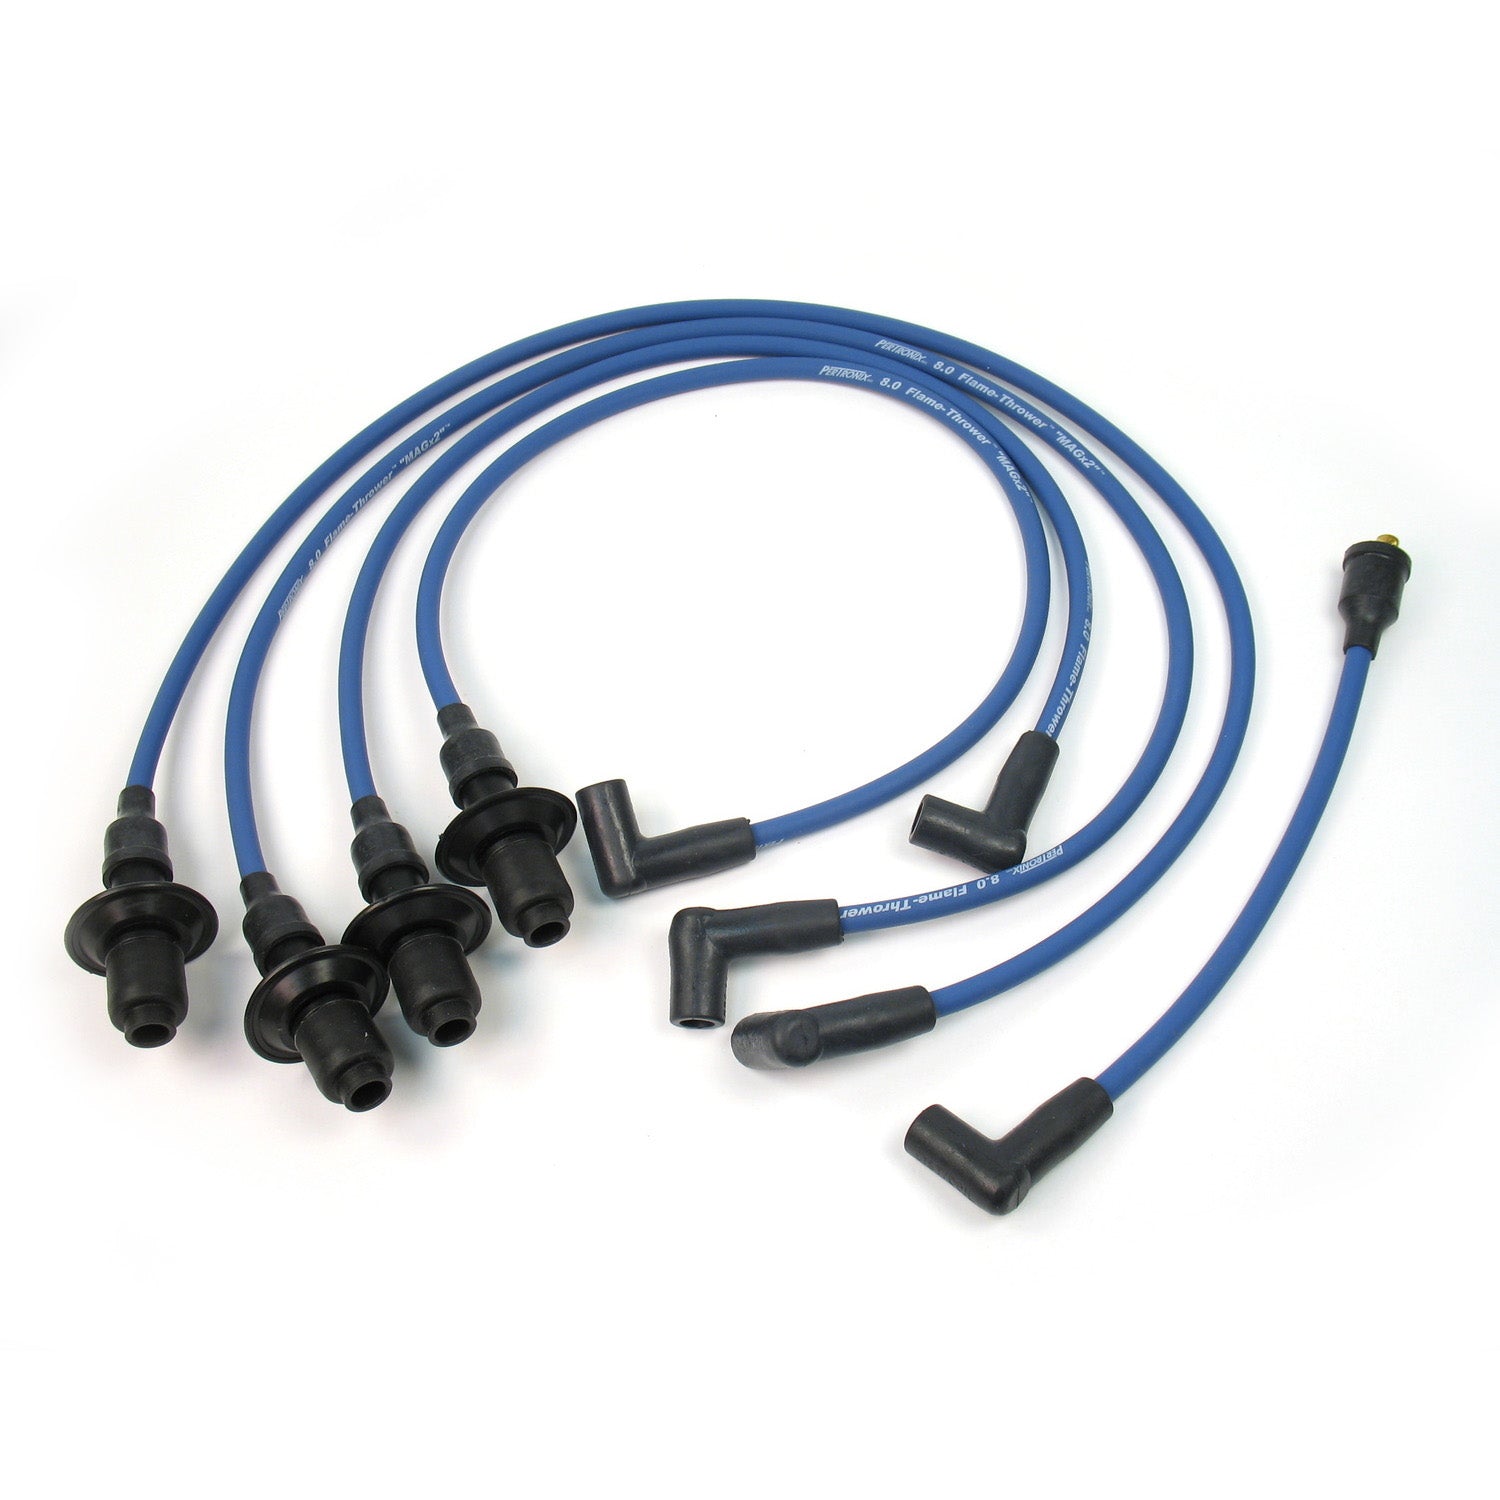 PerTronix 804303 Flame-Thrower Spark Plug Wires 4 cyl 8mm VW Male Cap Blue